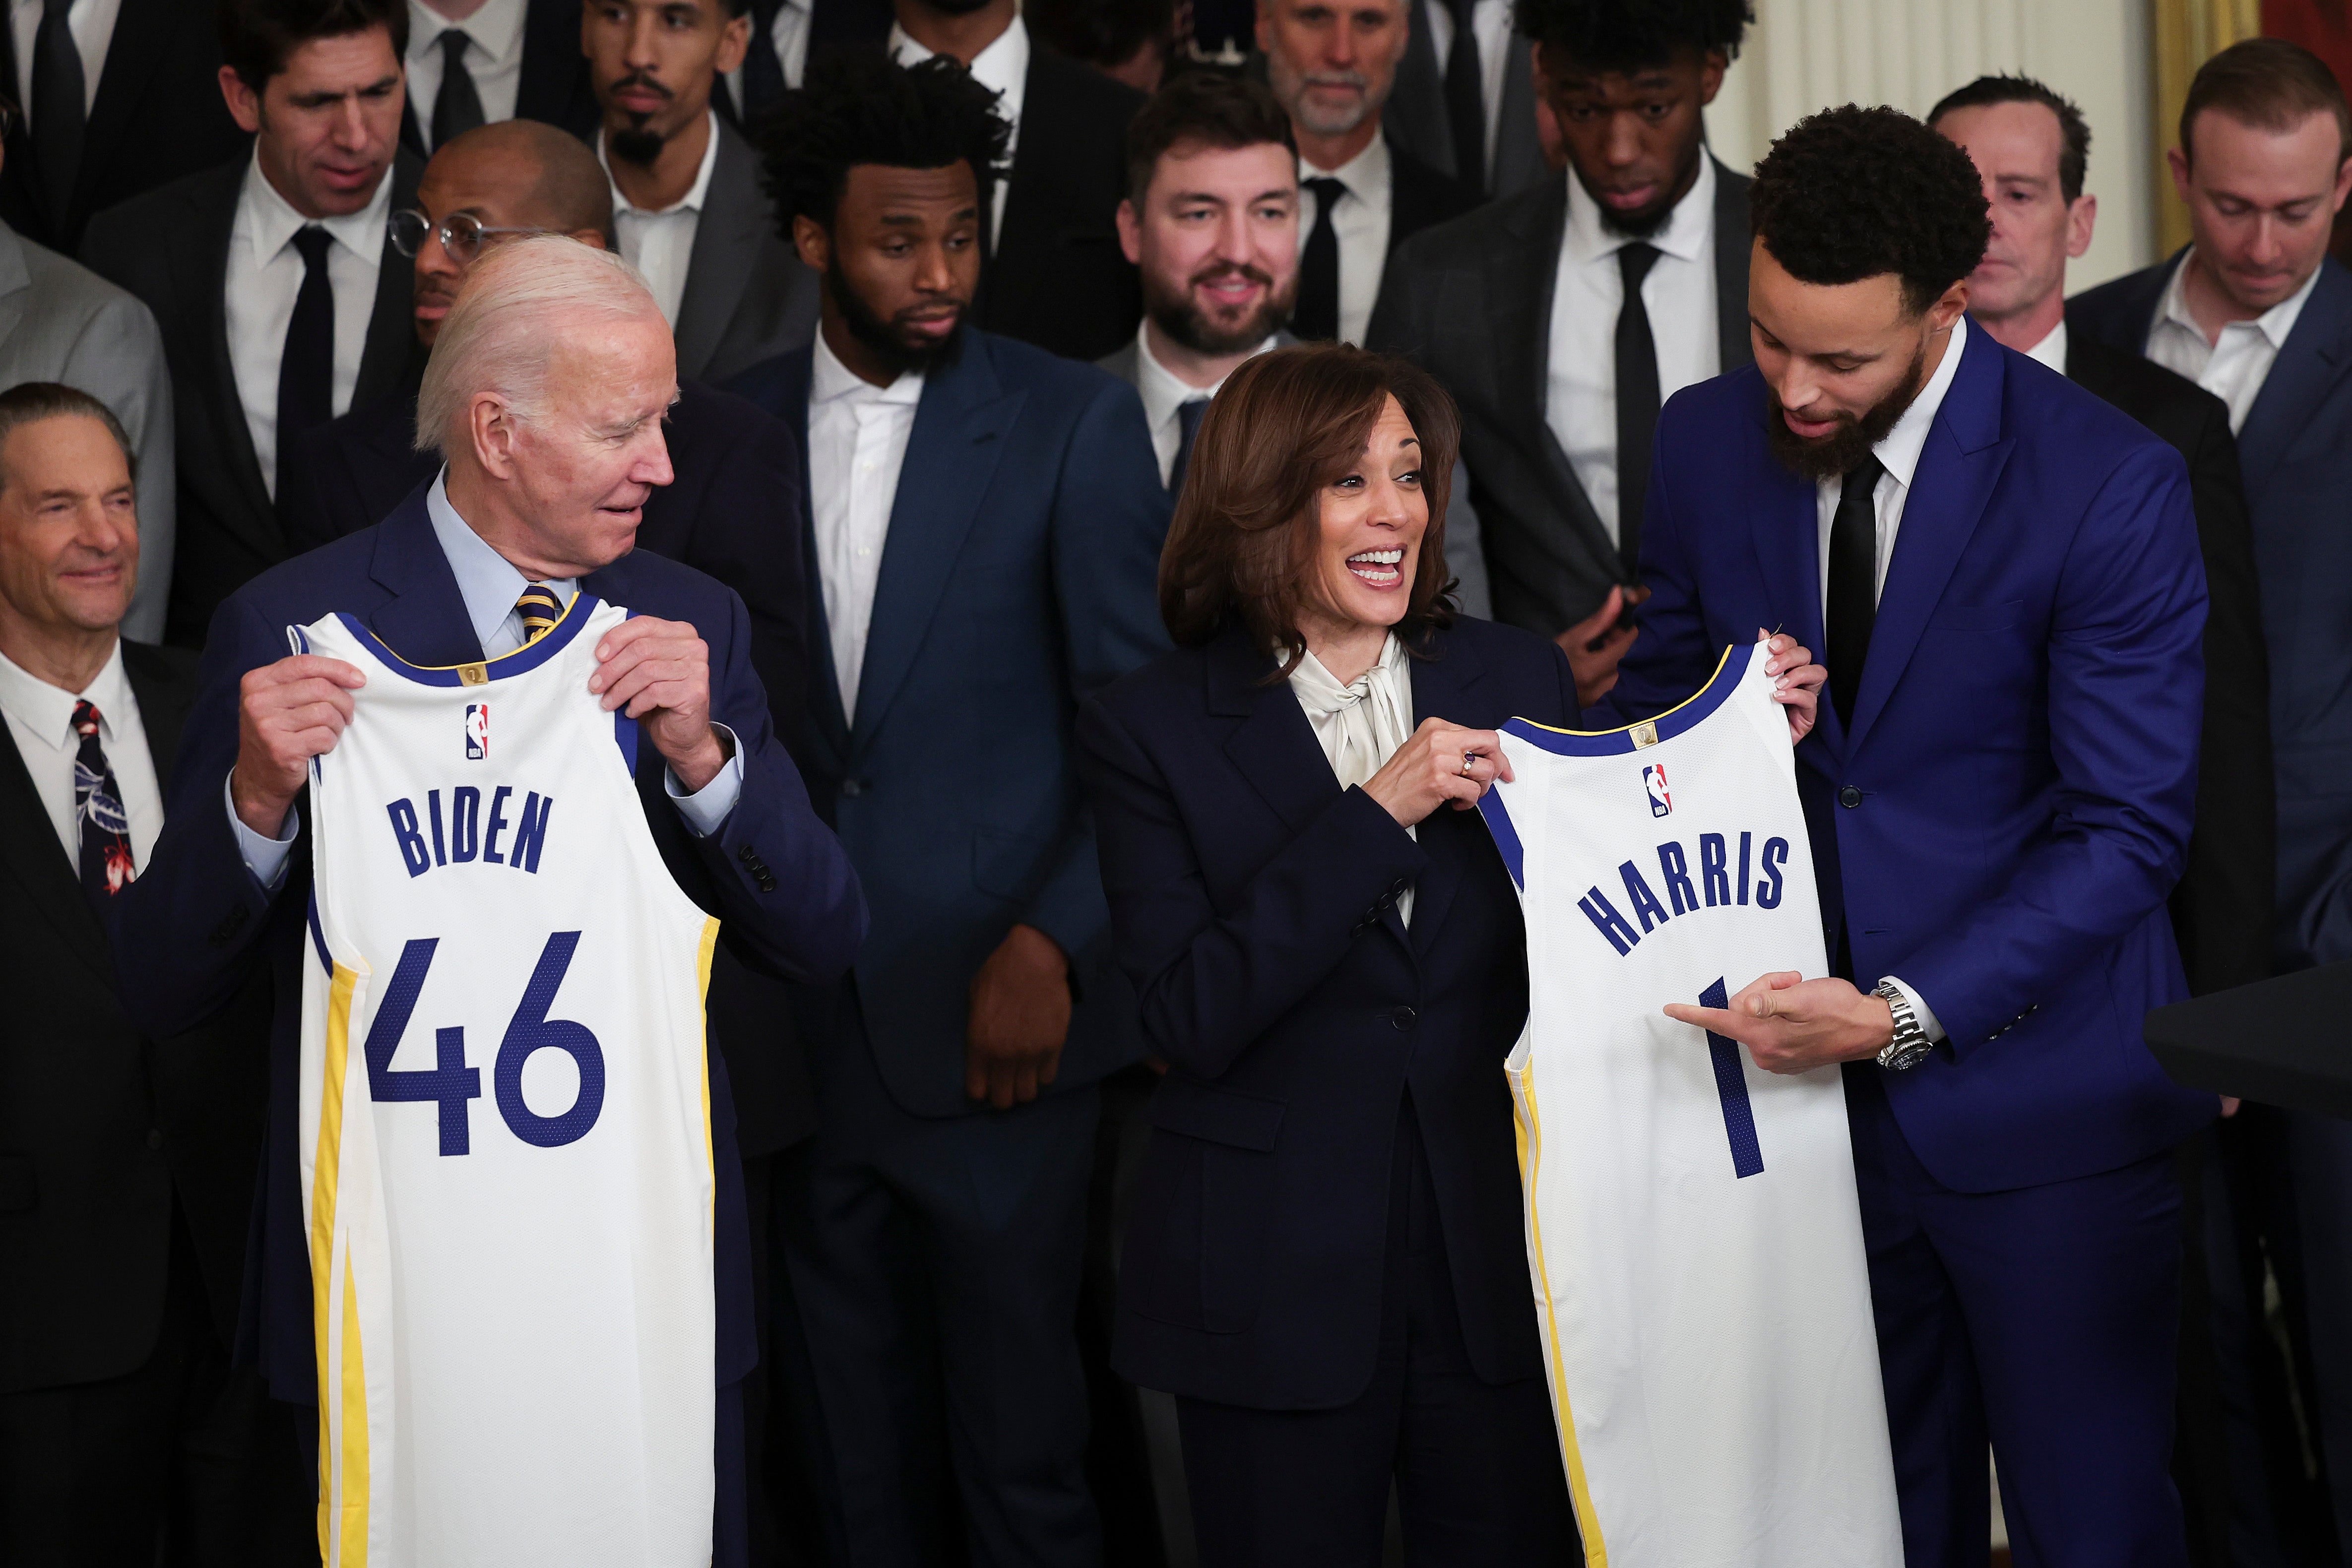 Steph Curry presents Joe Biden with a “46” jersey recognising the 46h president, while Vice President Kamala Harris receives a “1” jersey.